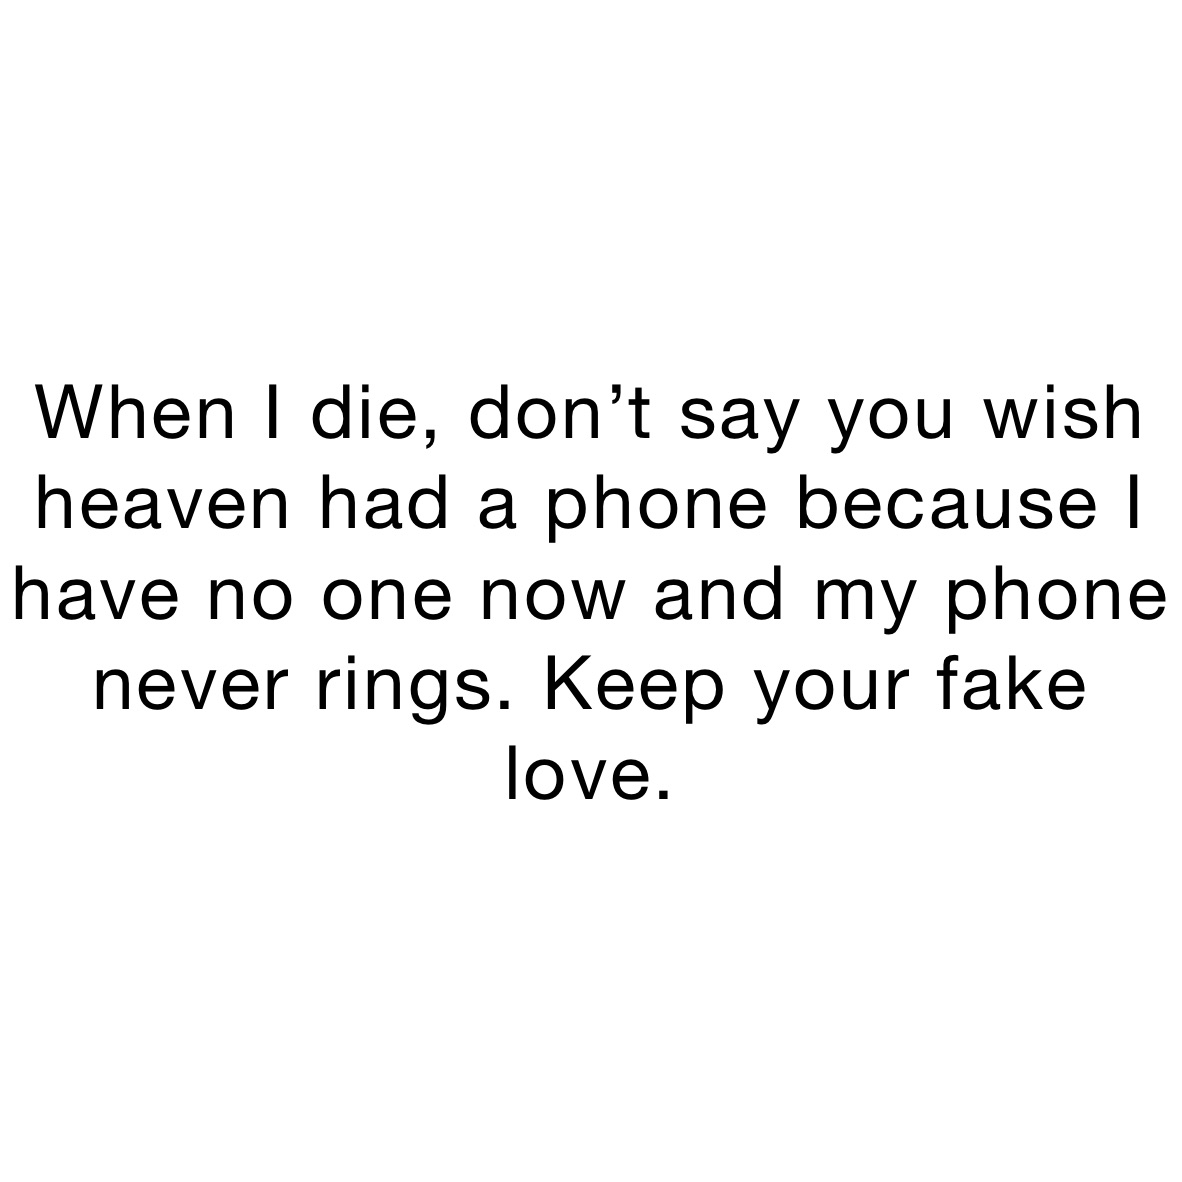 When I die, don’t say you wish heaven had a phone because I have no one now and my phone never rings. Keep your fake love. 